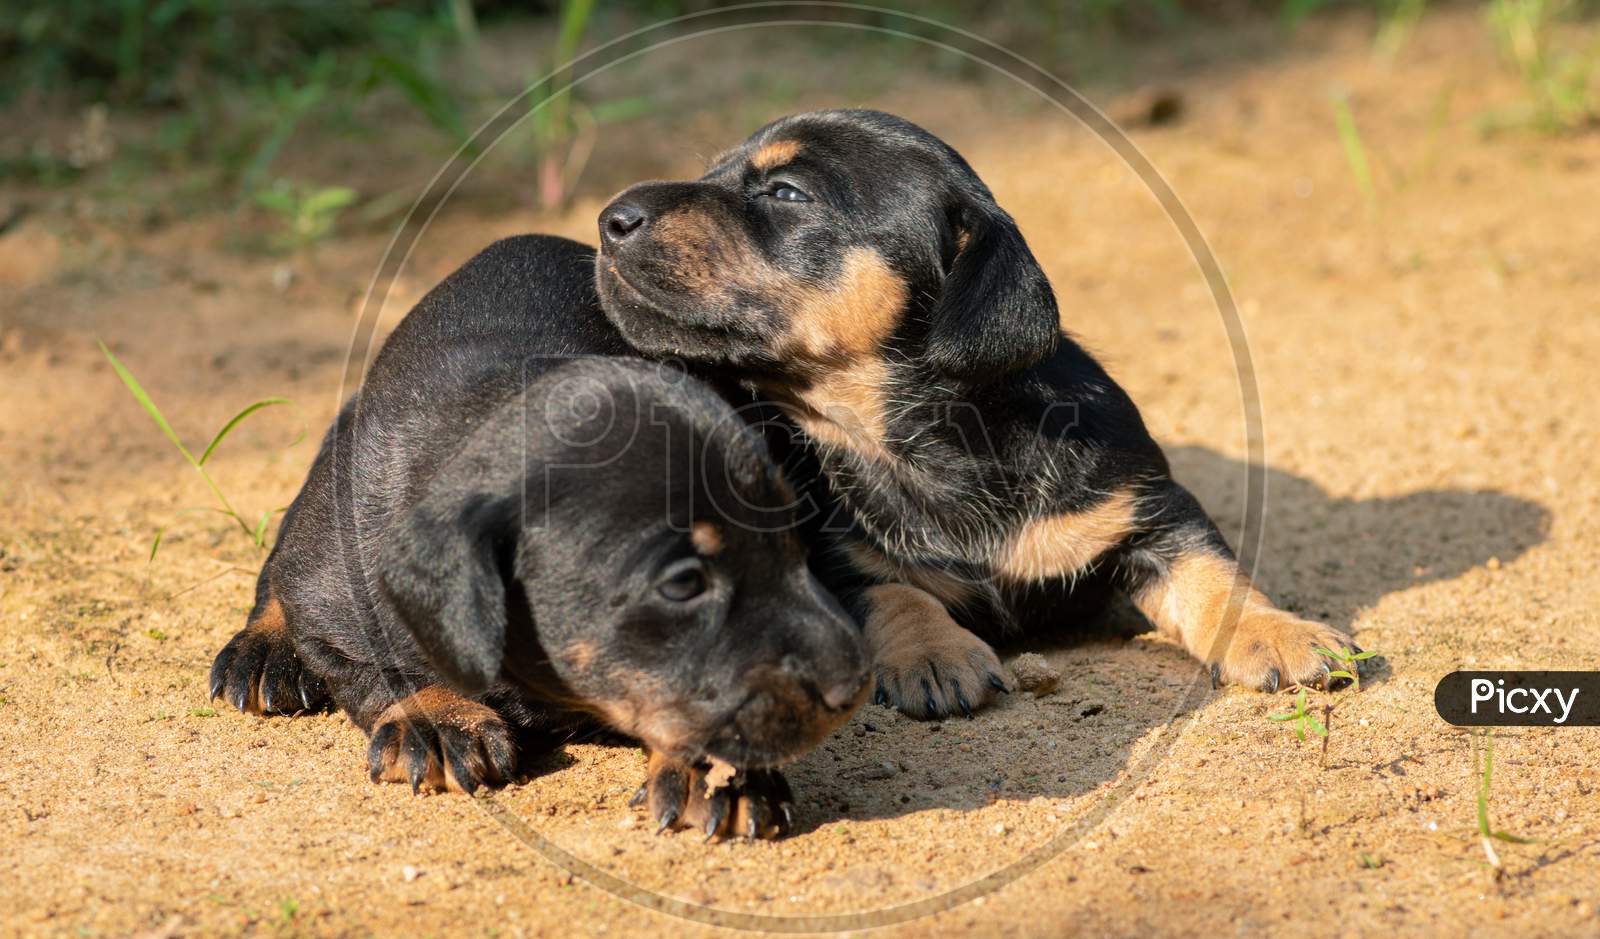 Two Weeks Old Newborn Dachshund Pups Playing Outdoor Backyard In The Evening, Sunlight Hitting Their Faces As They Shiver And Share The Warmth Of Their Body, Sibling Take Care Of Each Other Theme.